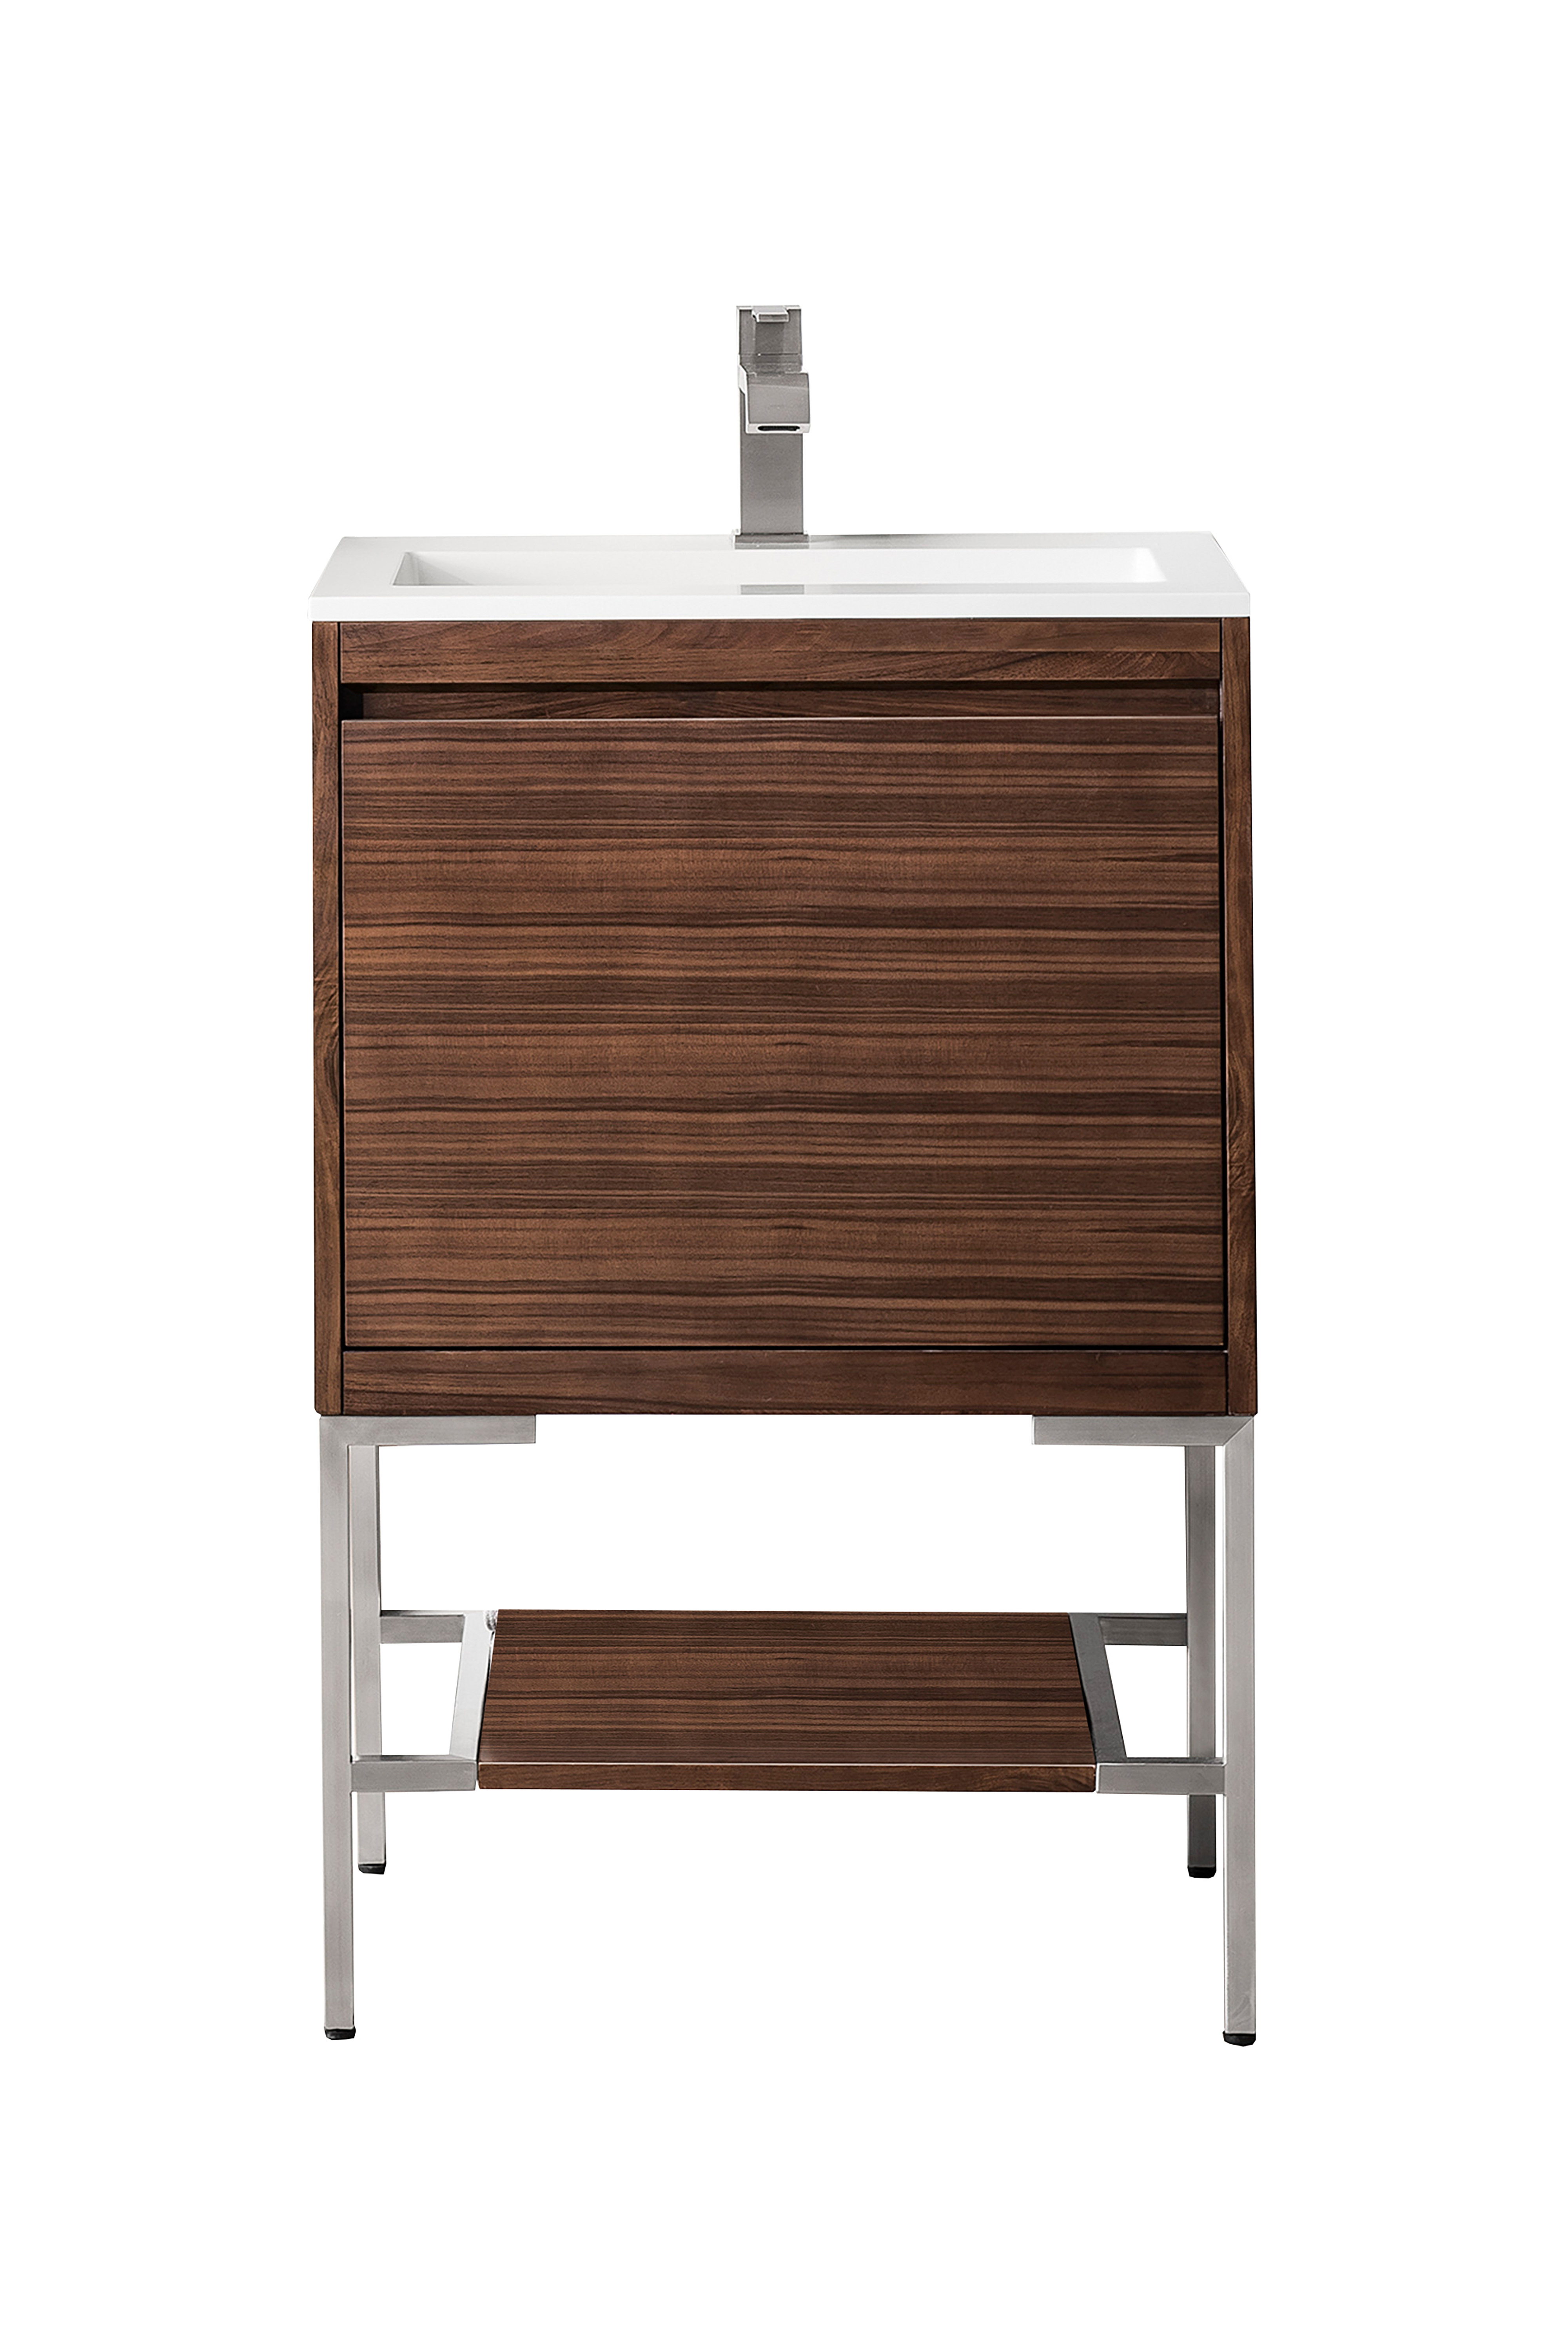 James Martin 801V23.6WLTBNKGW Milan 23.6" Single Vanity Cabinet, Mid Century Walnut, Brushed Nickel w/Glossy White Composite Top